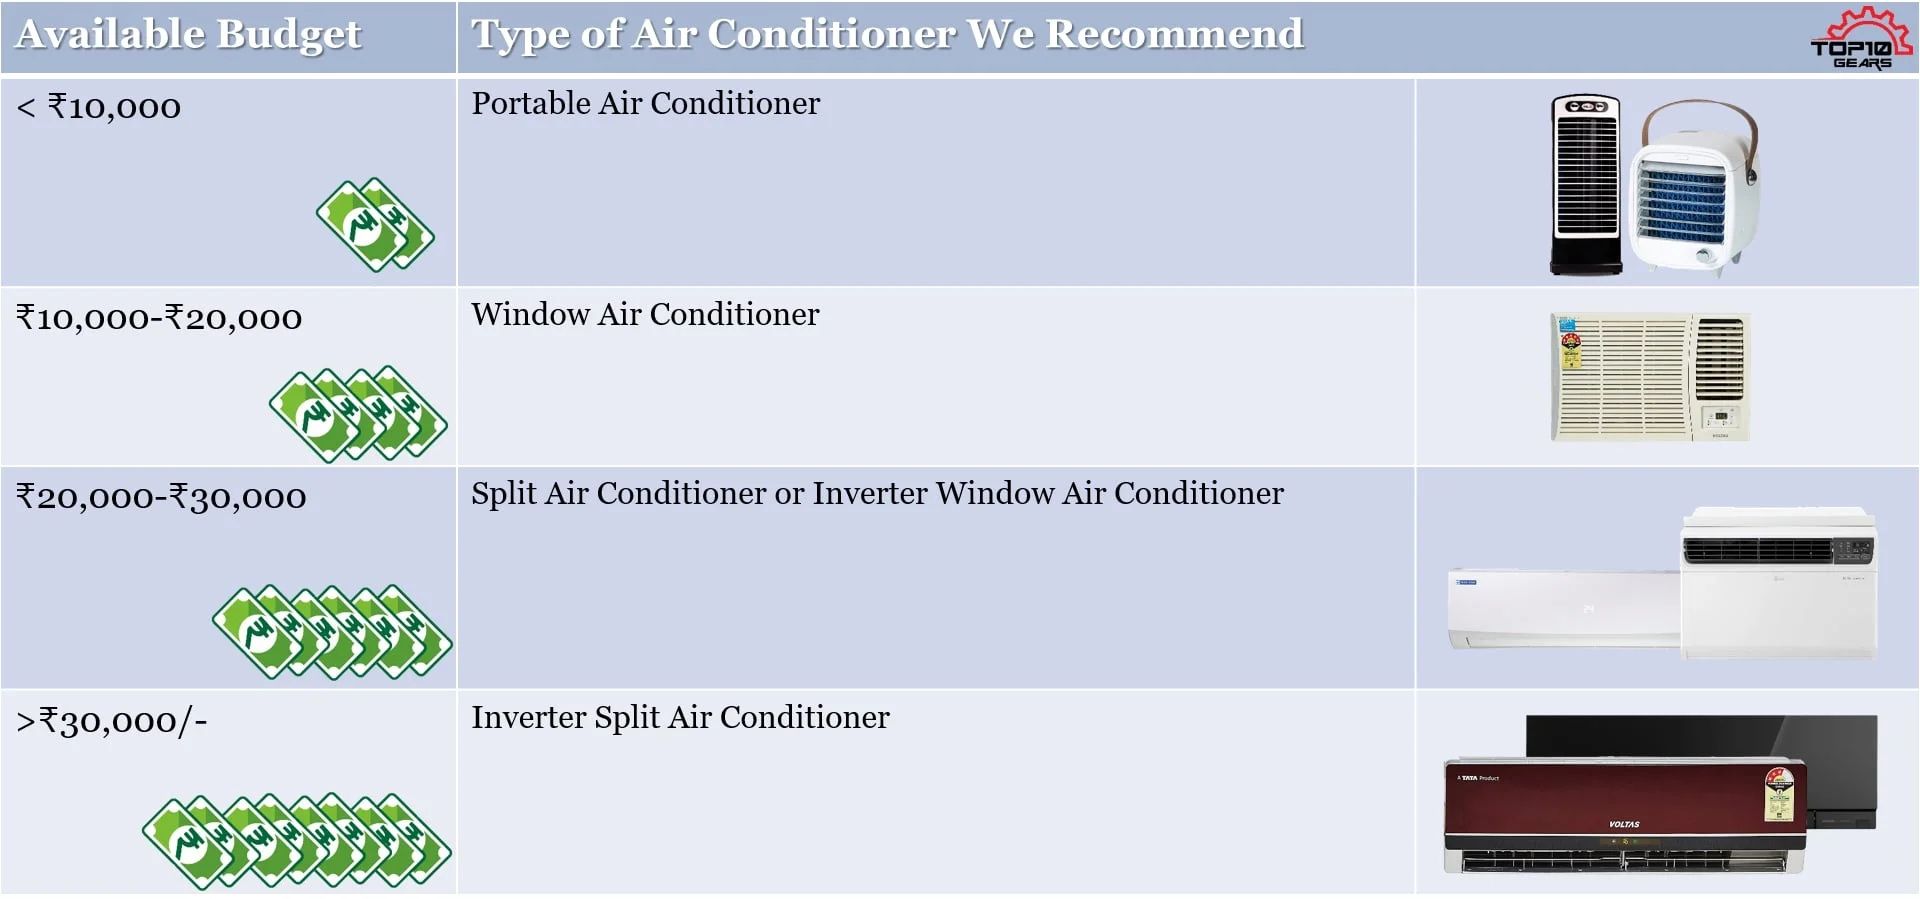 Budget_and_type_of_Air_Conditioner